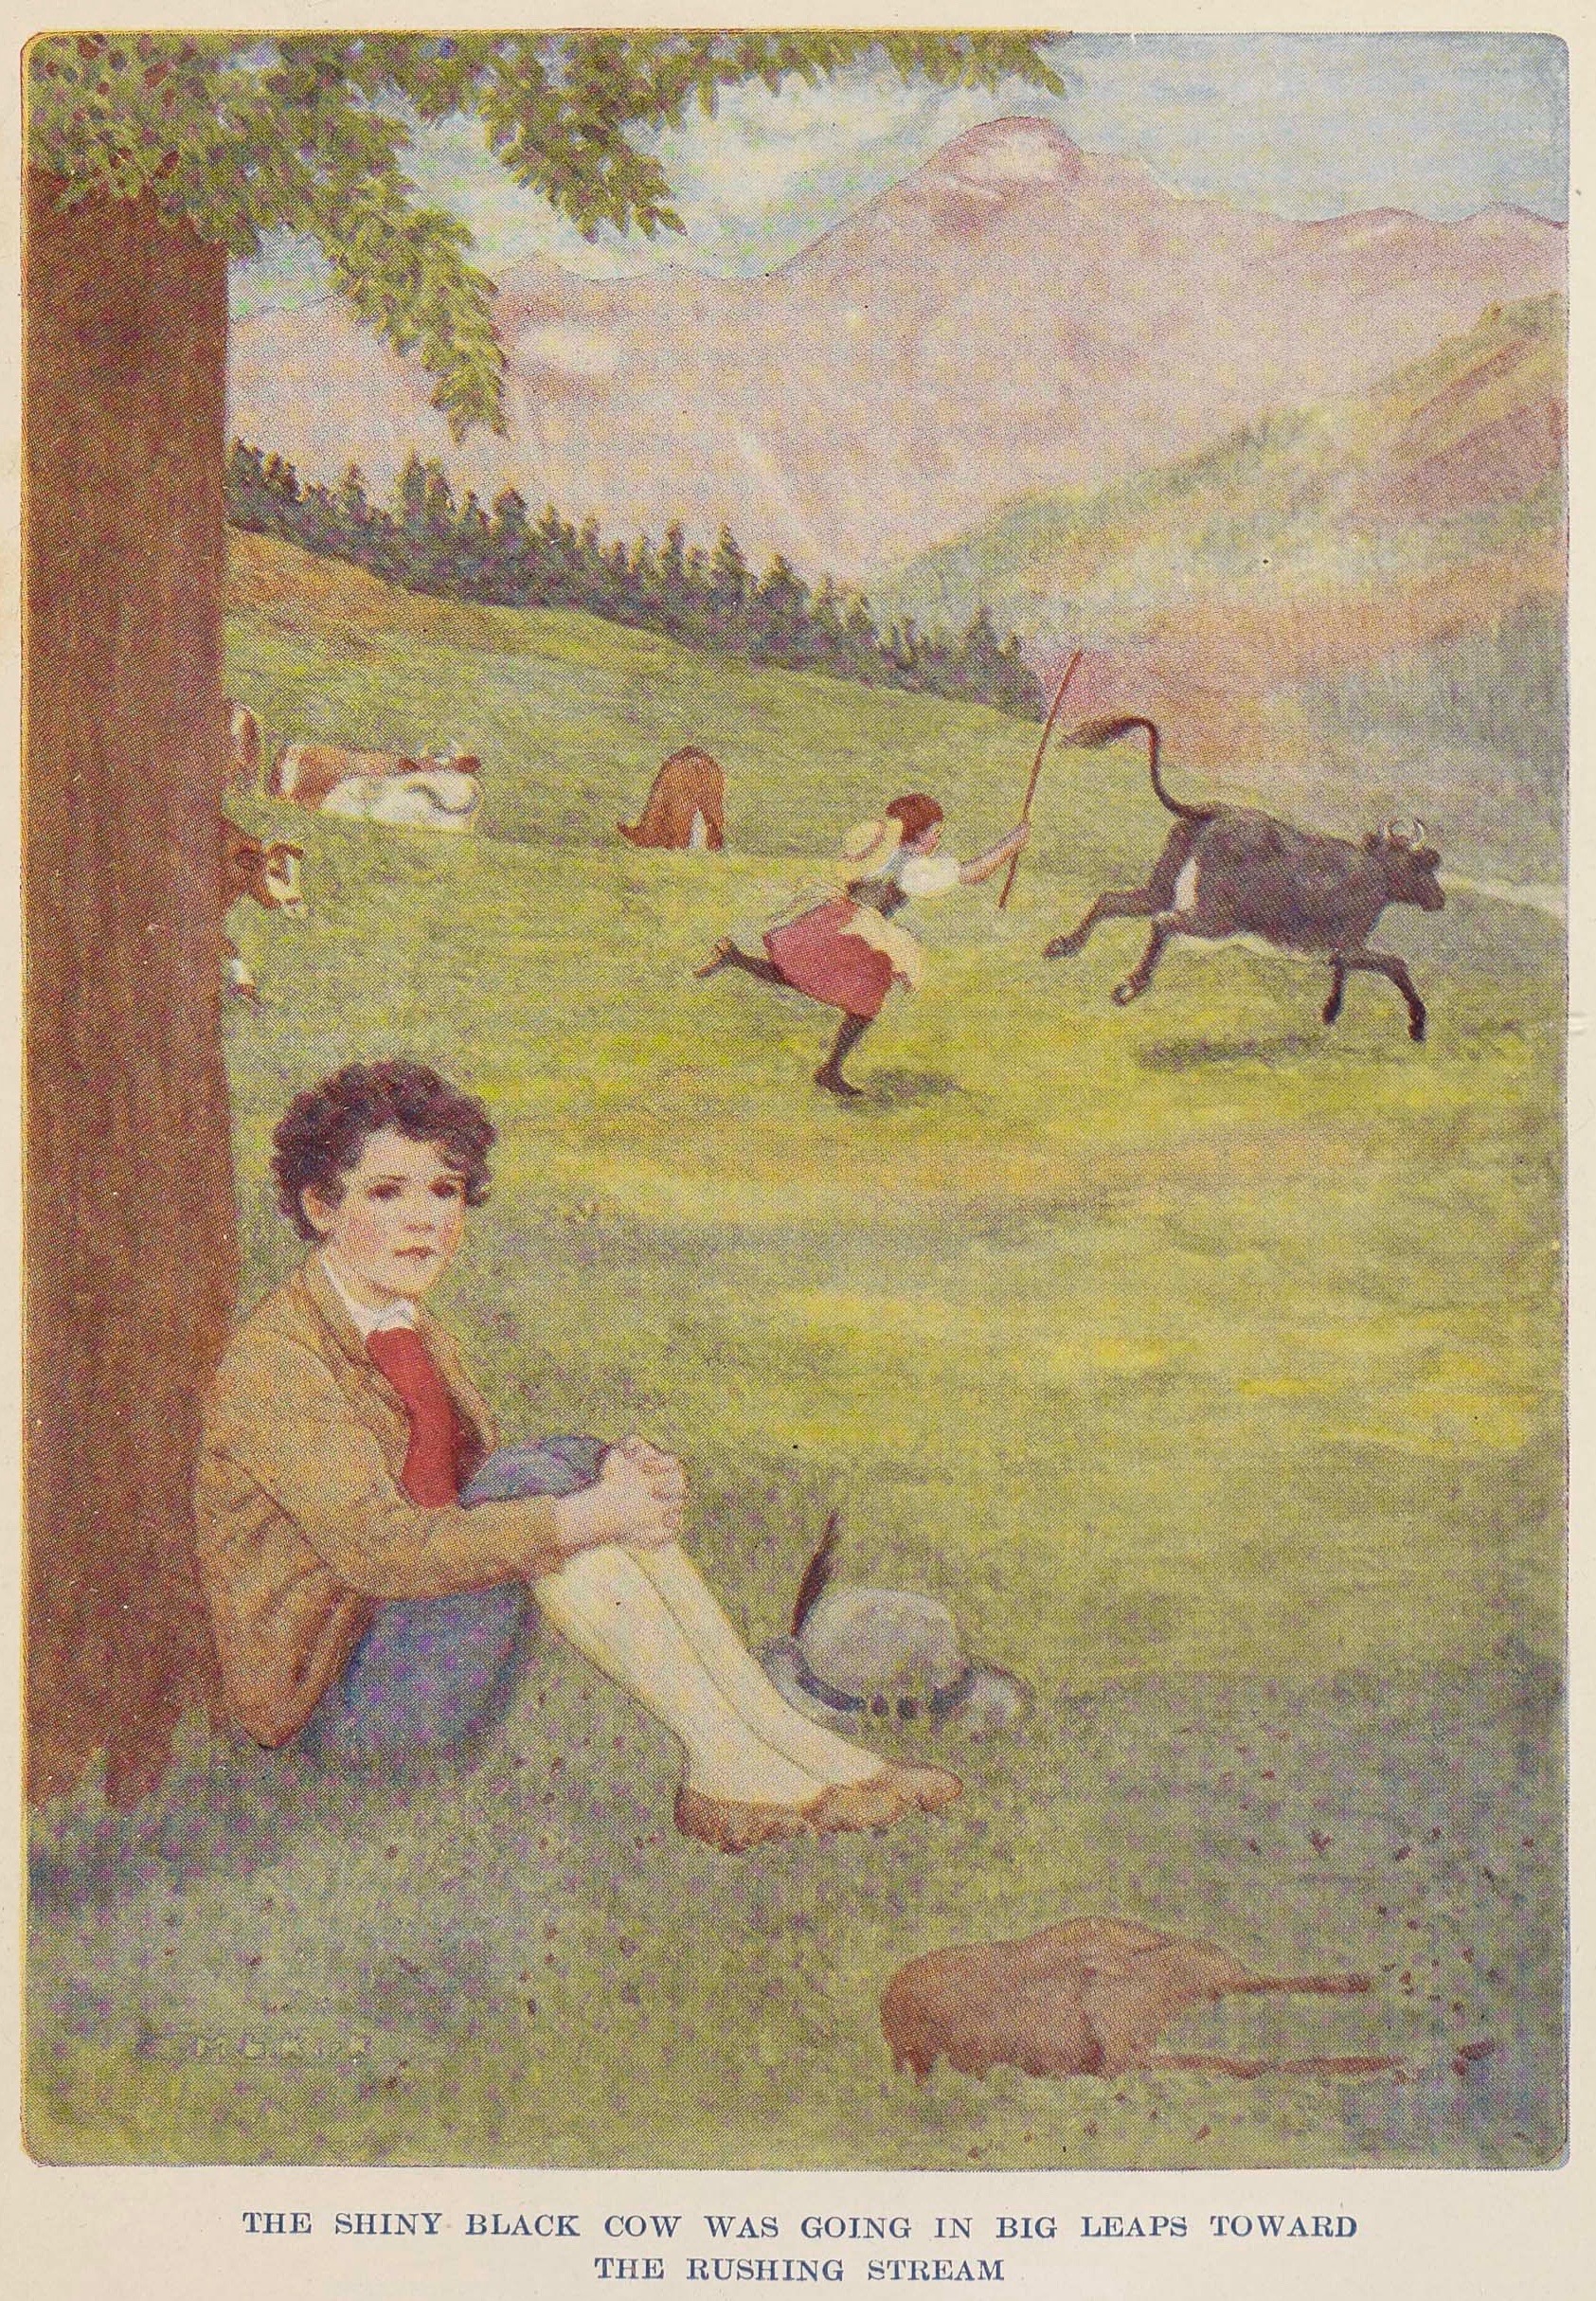 An illustration from the book Vinzi of a bucolic country scene showing a child sitting under a tree with another child chasing a cow in a field in the background.